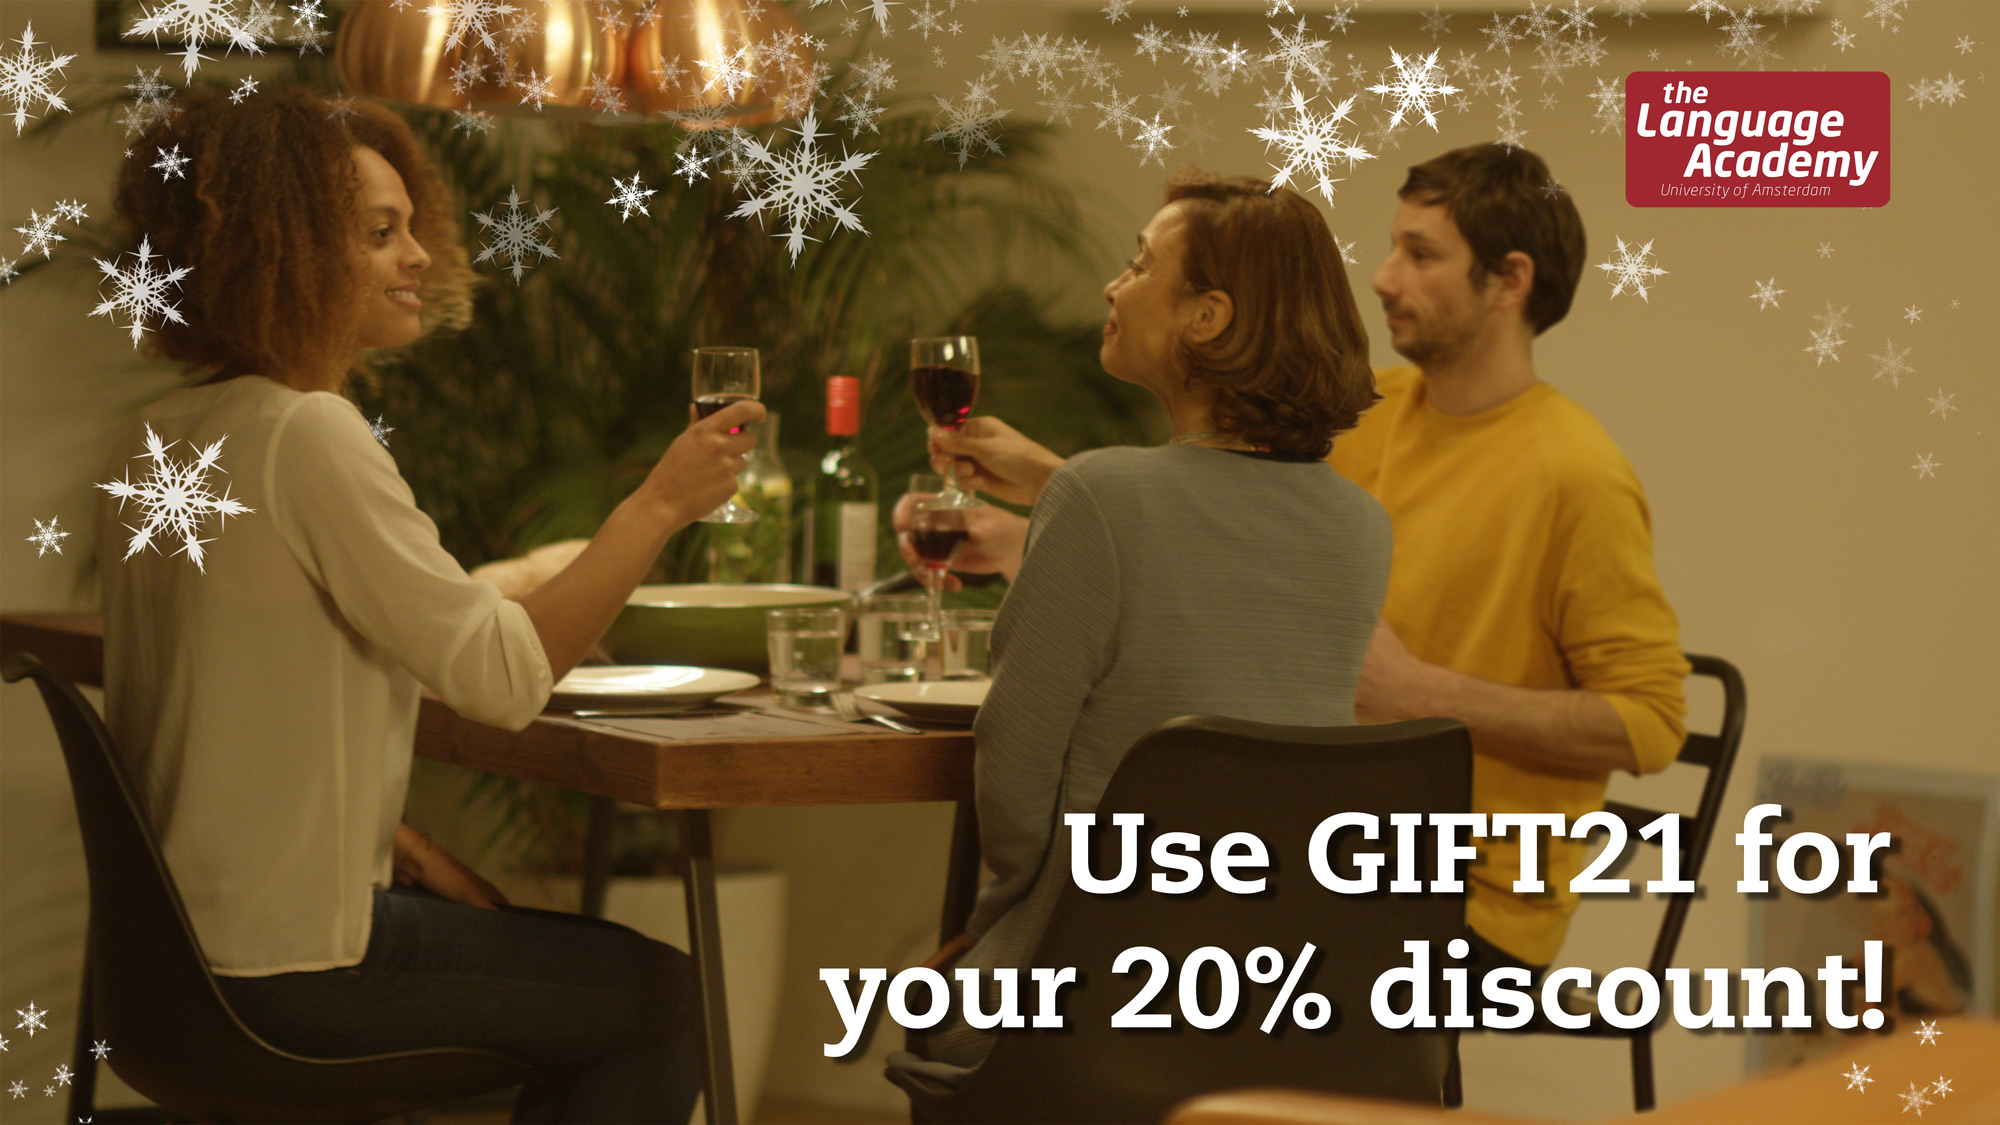 Use GIFT21 for your 20% discount!